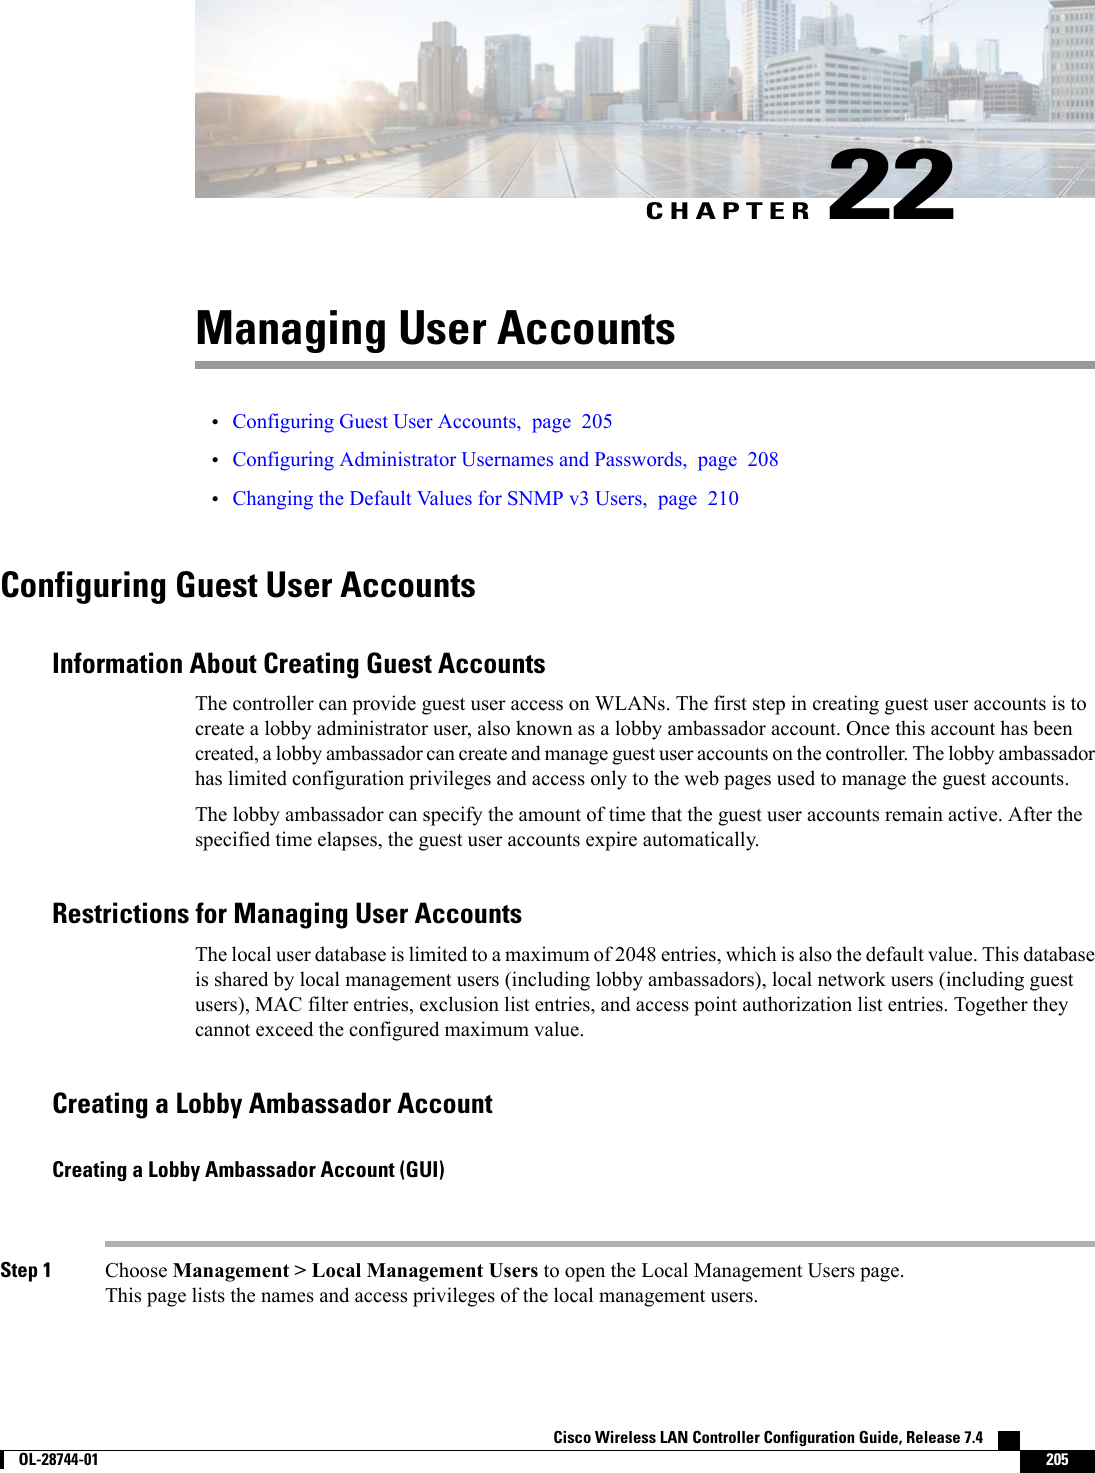 CHAPTER 22Managing User Accounts•Configuring Guest User Accounts, page 205•Configuring Administrator Usernames and Passwords, page 208•Changing the Default Values for SNMP v3 Users, page 210Configuring Guest User AccountsInformation About Creating Guest AccountsThe controller can provide guest user access on WLANs. The first step in creating guest user accounts is tocreate a lobby administrator user, also known as a lobby ambassador account. Once this account has beencreated, a lobby ambassador can create and manage guest user accounts on the controller. The lobby ambassadorhas limited configuration privileges and access only to the web pages used to manage the guest accounts.The lobby ambassador can specify the amount of time that the guest user accounts remain active. After thespecified time elapses, the guest user accounts expire automatically.Restrictions for Managing User AccountsThe local user database is limited to a maximum of 2048 entries, which is also the default value. This databaseis shared by local management users (including lobby ambassadors), local network users (including guestusers), MAC filter entries, exclusion list entries, and access point authorization list entries. Together theycannot exceed the configured maximum value.Creating a Lobby Ambassador AccountCreating a Lobby Ambassador Account (GUI)Step 1 Choose Management &gt; Local Management Users to open the Local Management Users page.This page lists the names and access privileges of the local management users.Cisco Wireless LAN Controller Configuration Guide, Release 7.4        OL-28744-01 205